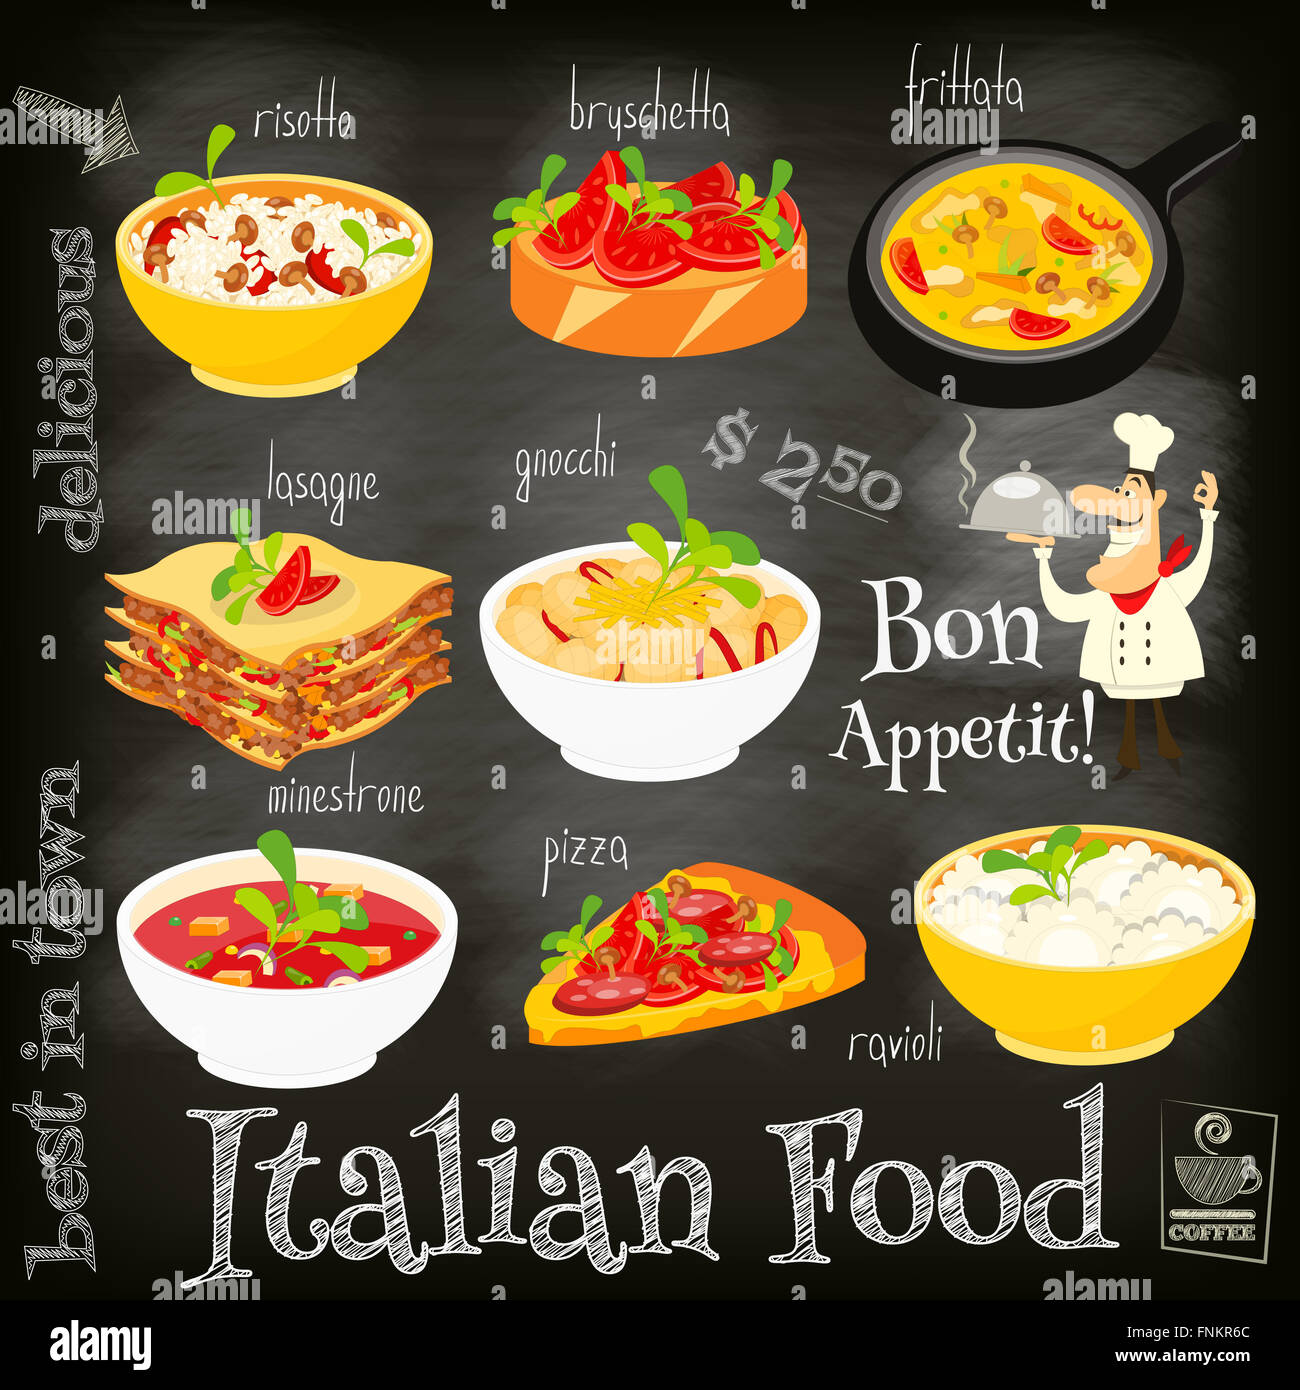 Everyone Loves Food. Here's an Interesting Quiz on "Italian Cuisine". thumbnail